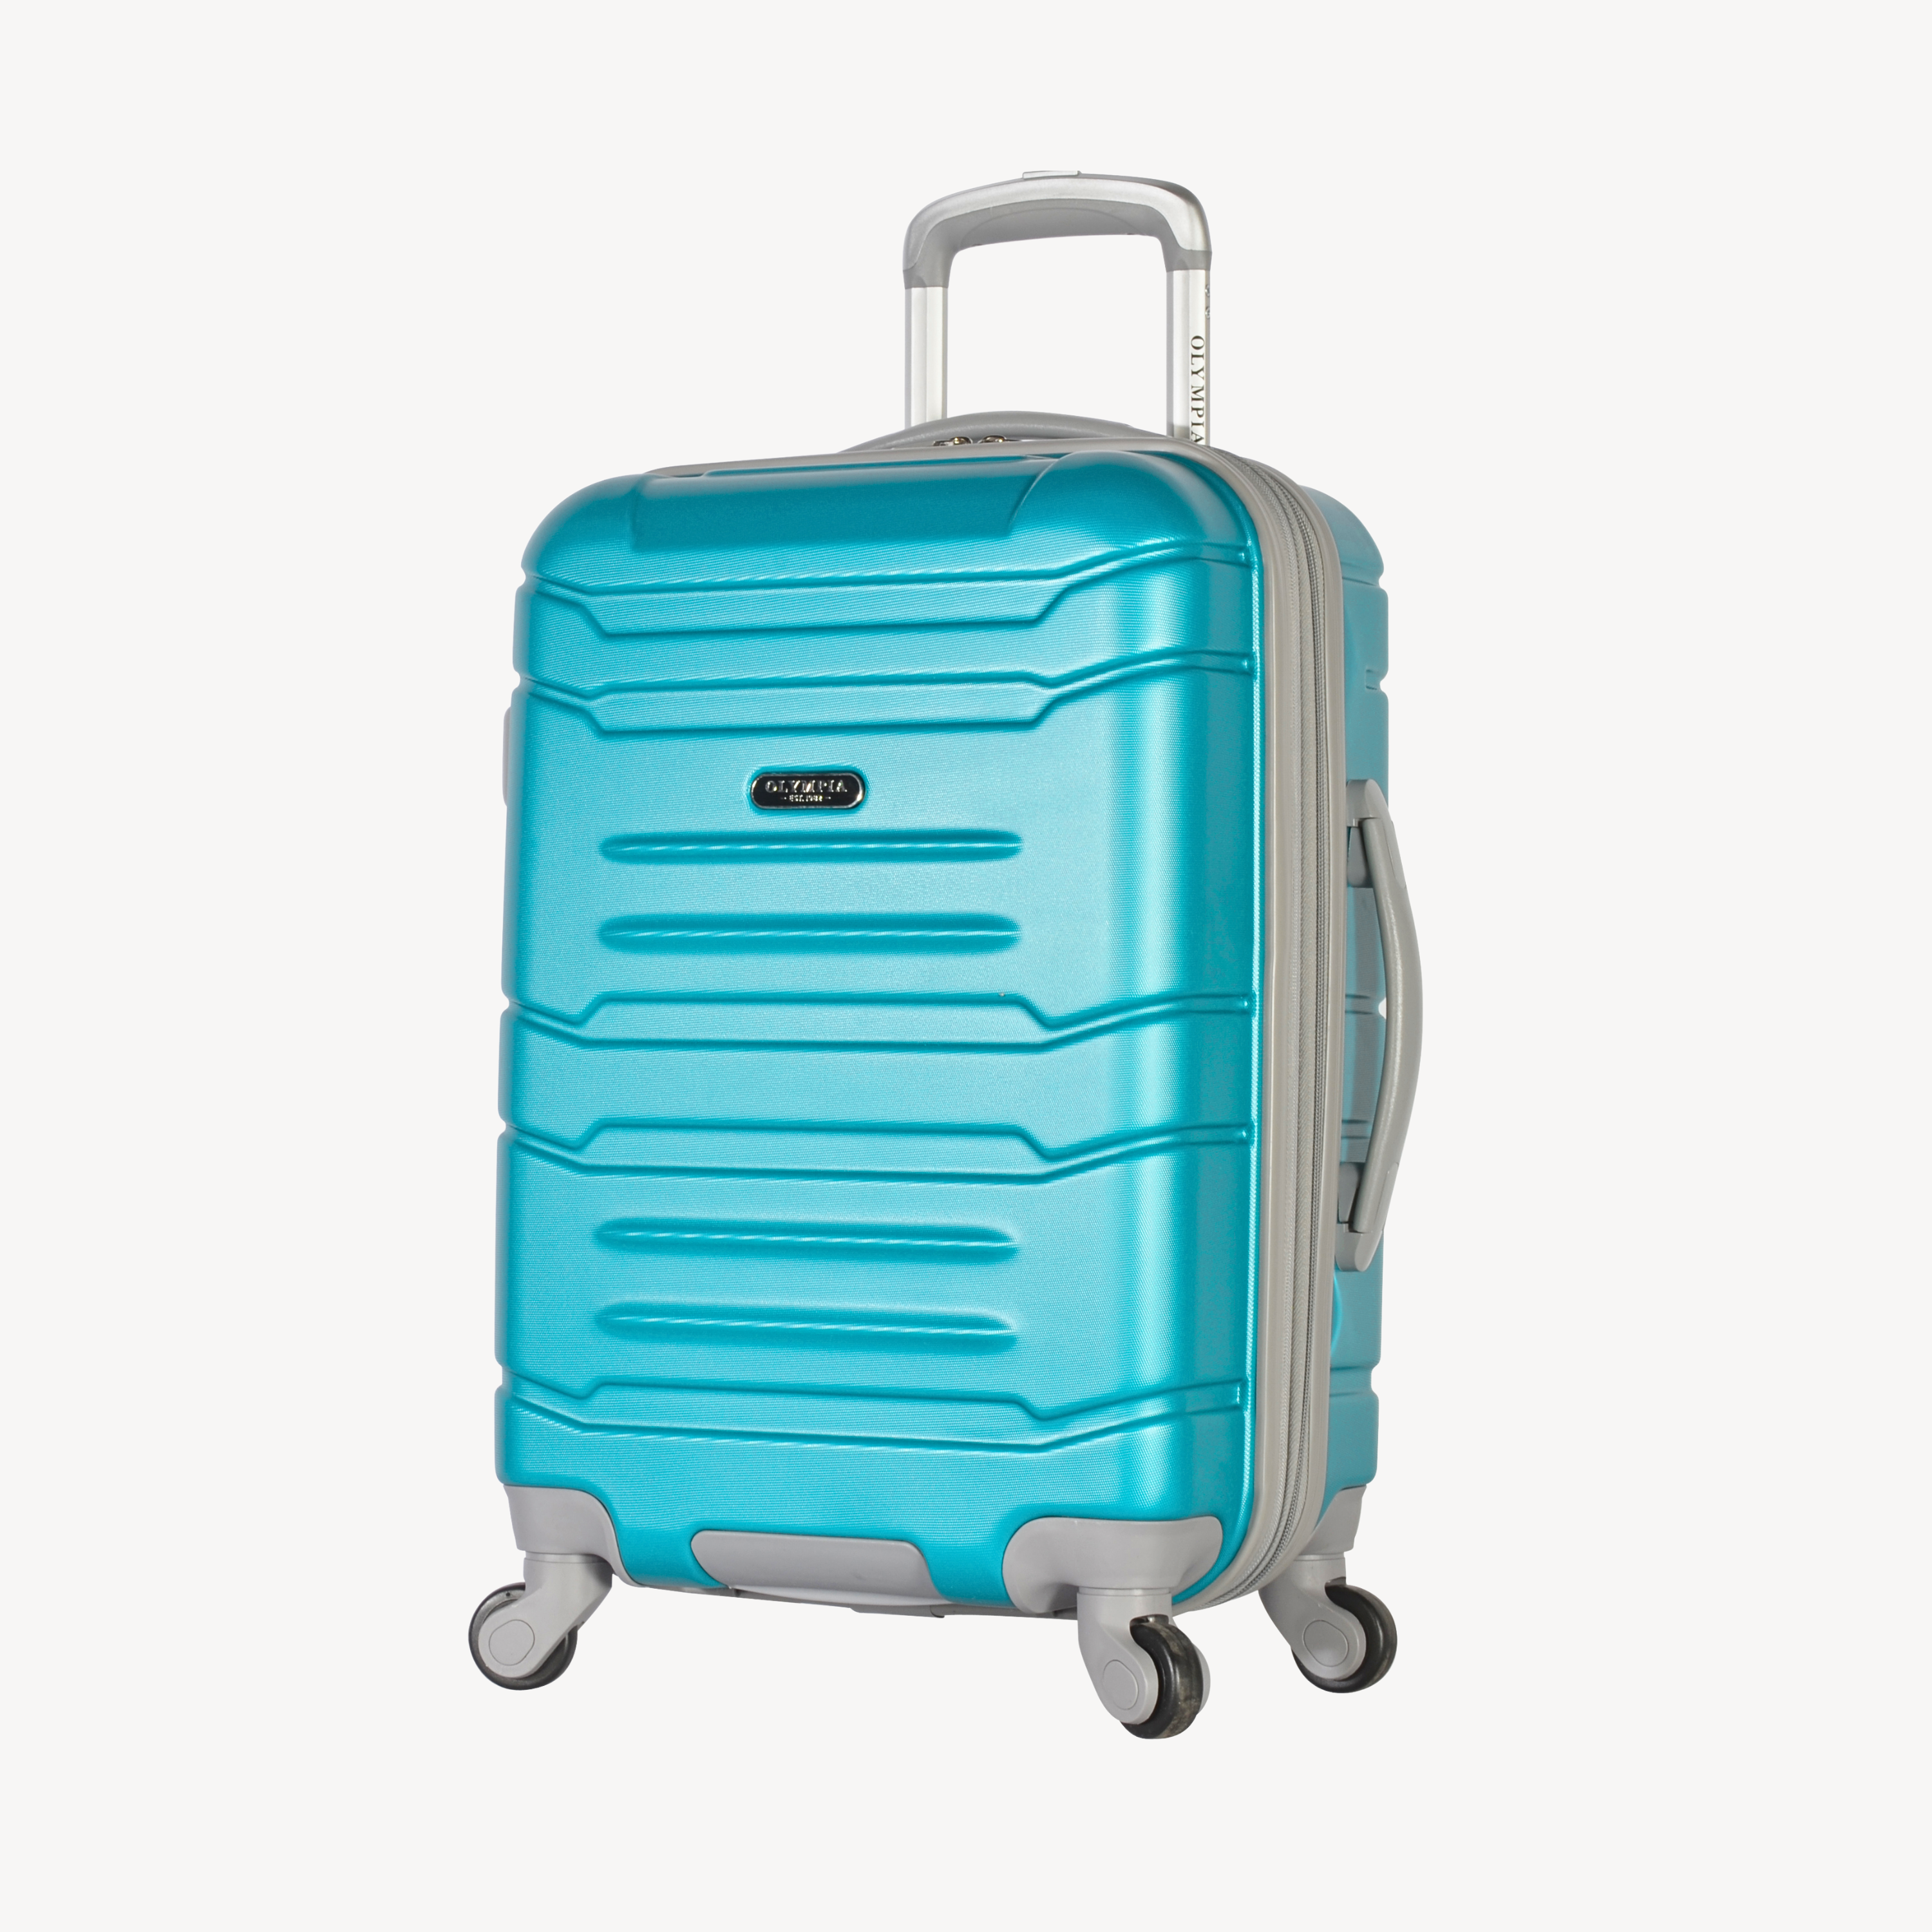 Olympia Denmark 21-inch Expandable Carry-On with 4-Wheel Spinner